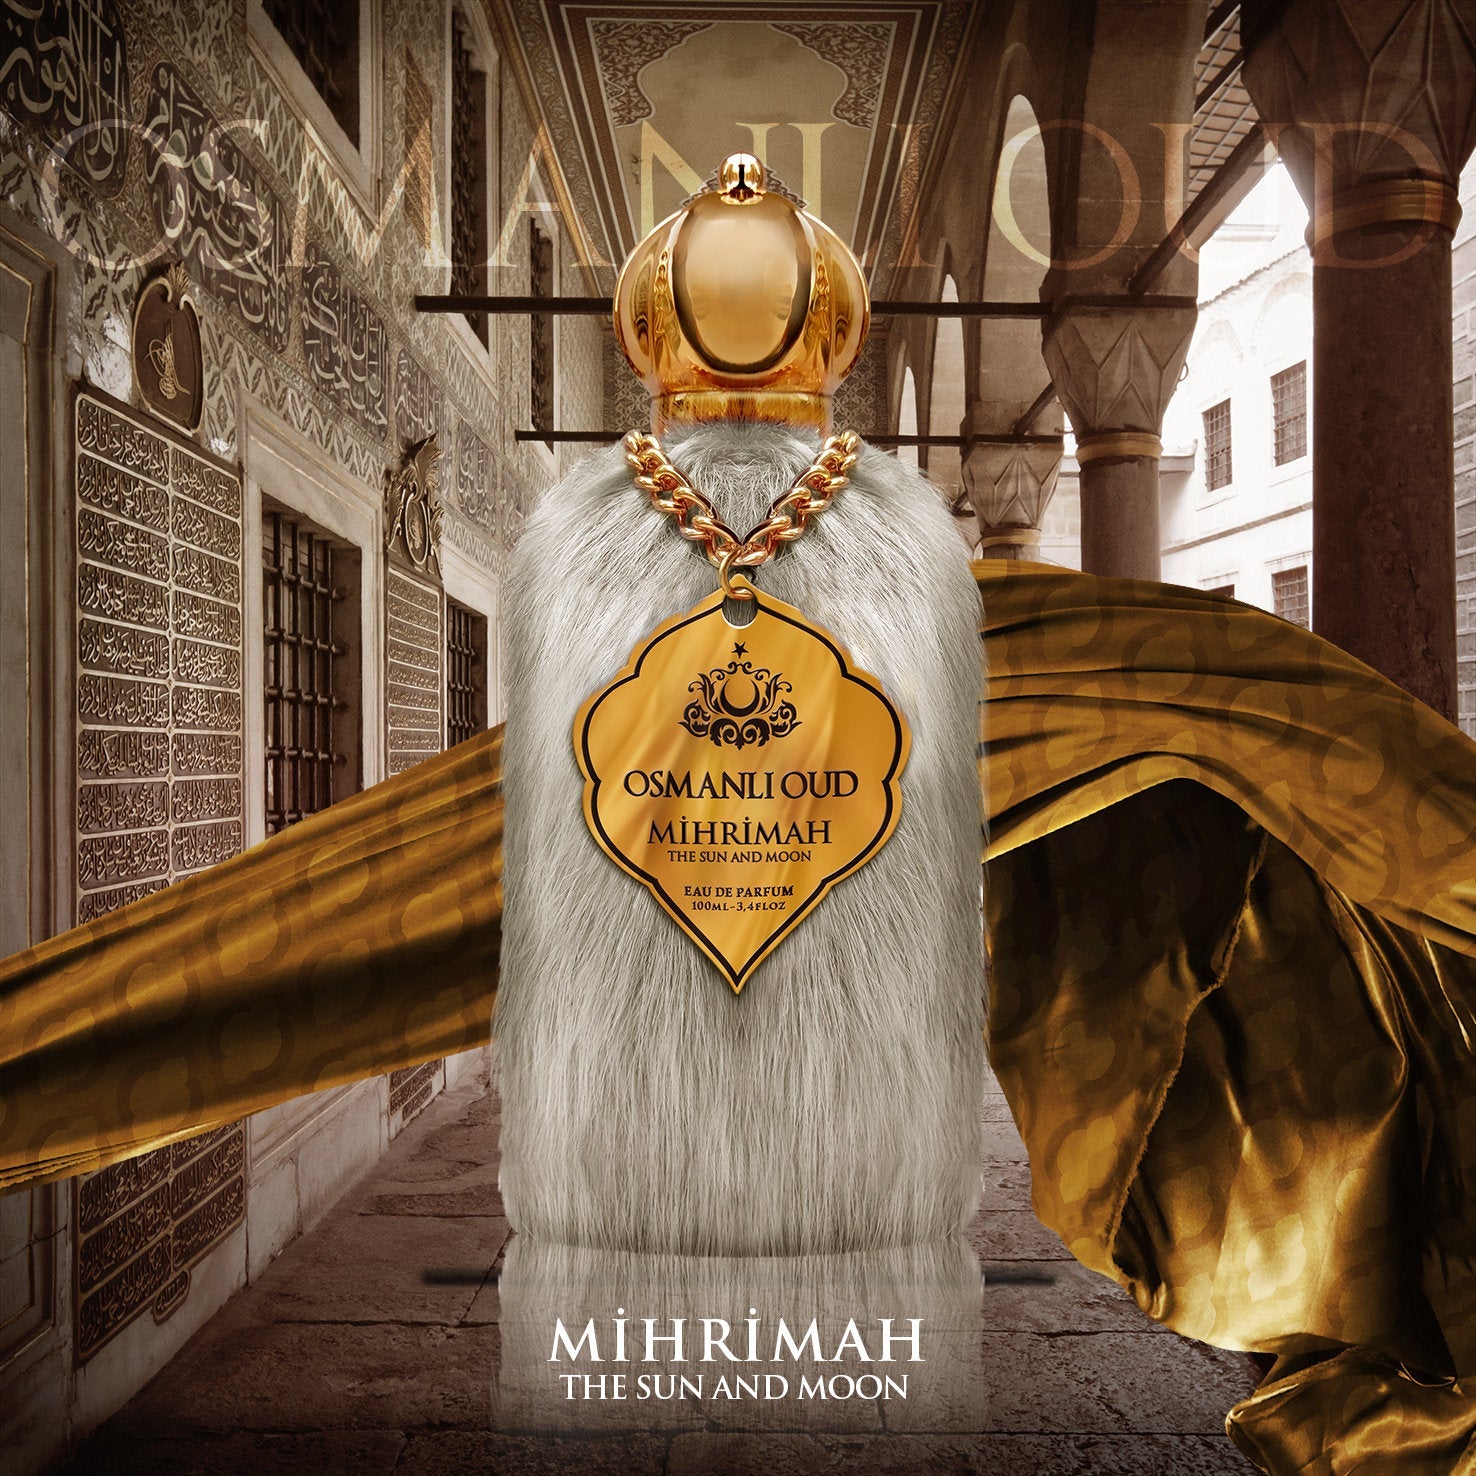 Osmanli Oud Magnificent Century Mihrimah The Sun And Moon Edp Perfume , 100 ml Ottoman Oud Licensed Perfume for Womens - Turkish TV Series